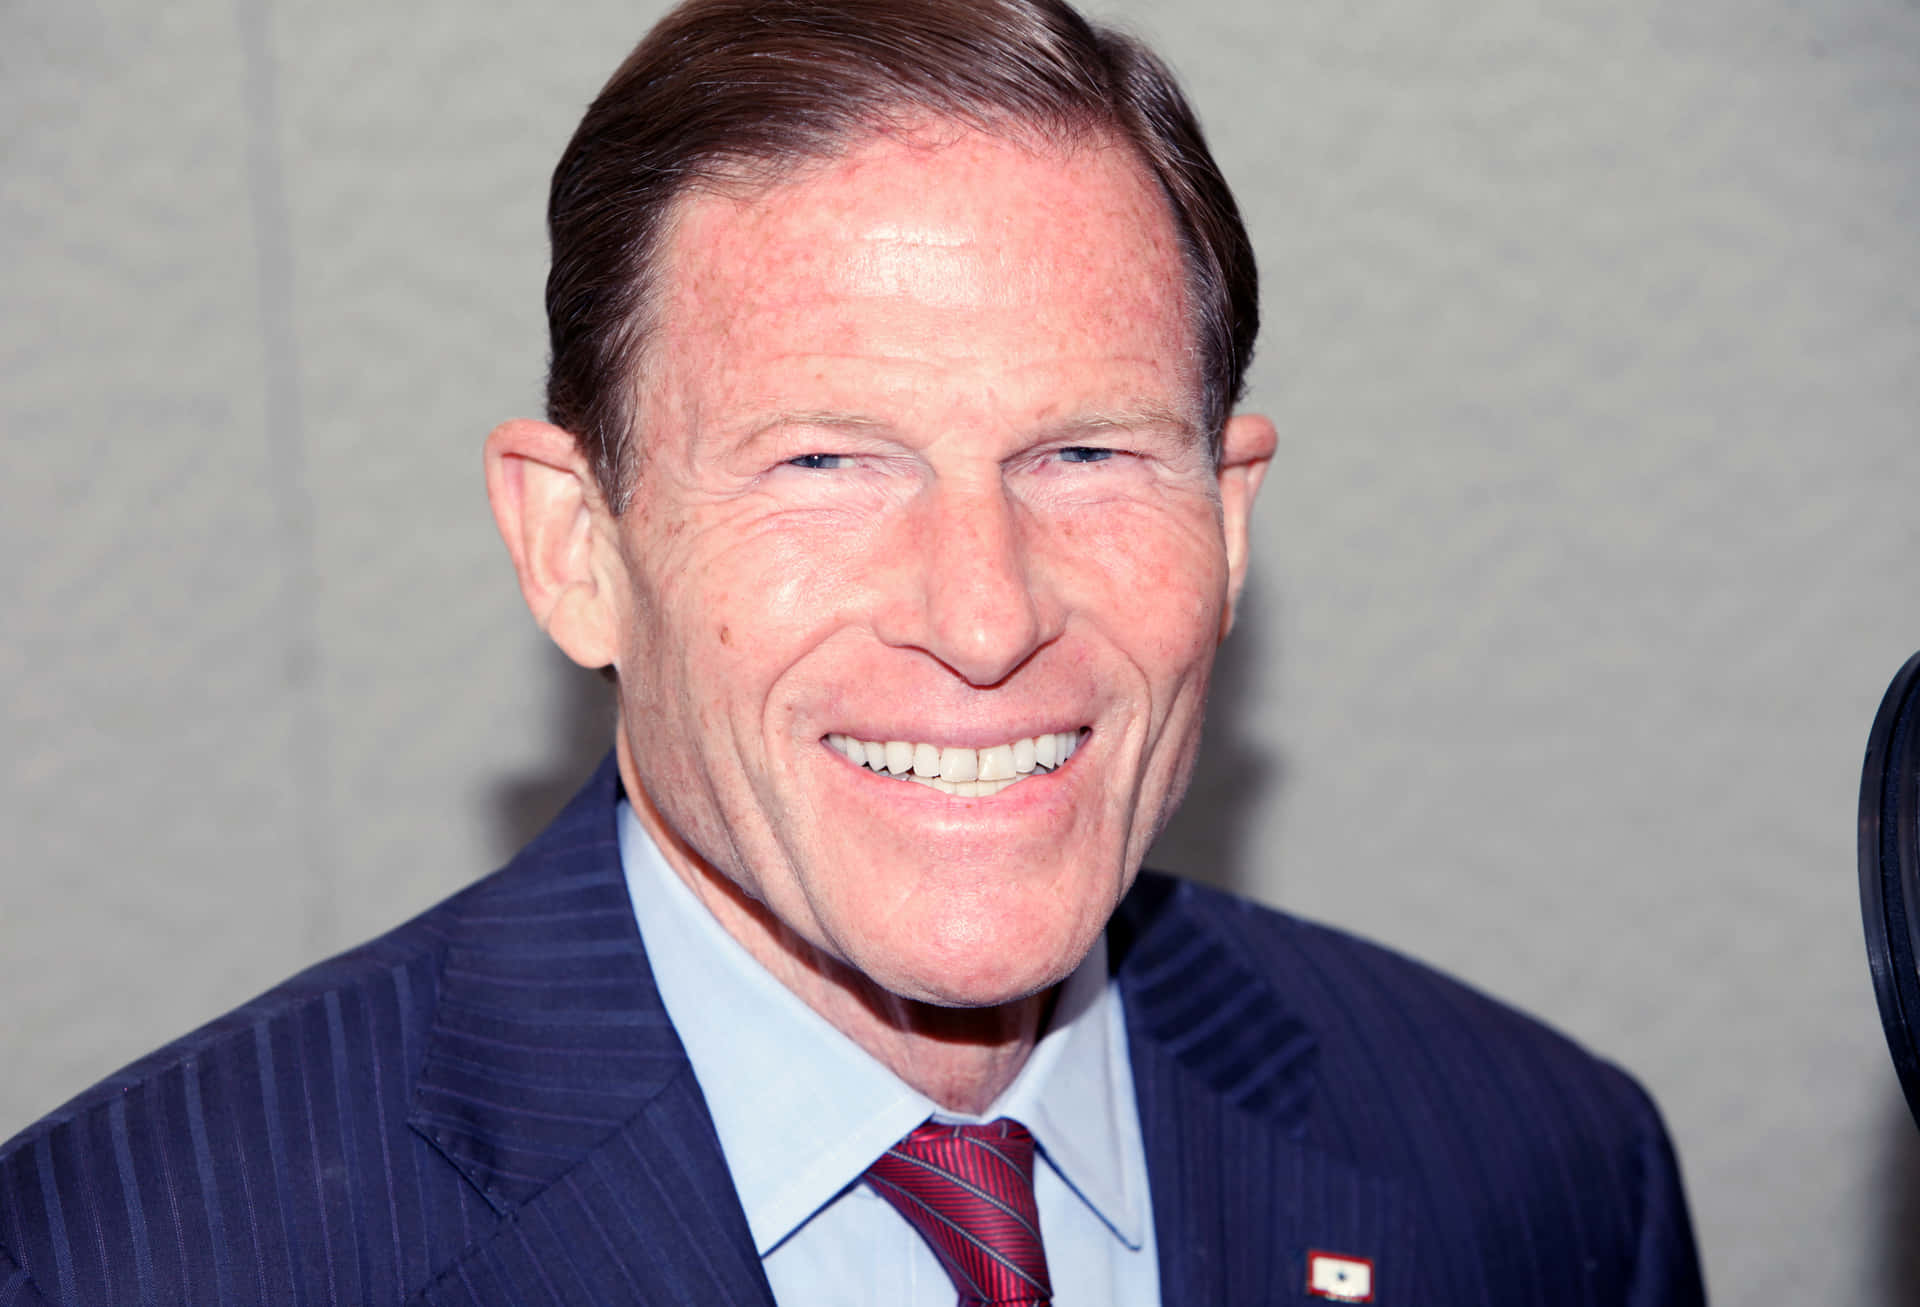 Richardblumenthal Ler I En Blå Kostym - This Could Be A Potential Title For A Computer Or Mobile Wallpaper Featuring A Photo Of Senator Richard Blumenthal Smiling In A Blue Suit. Wallpaper